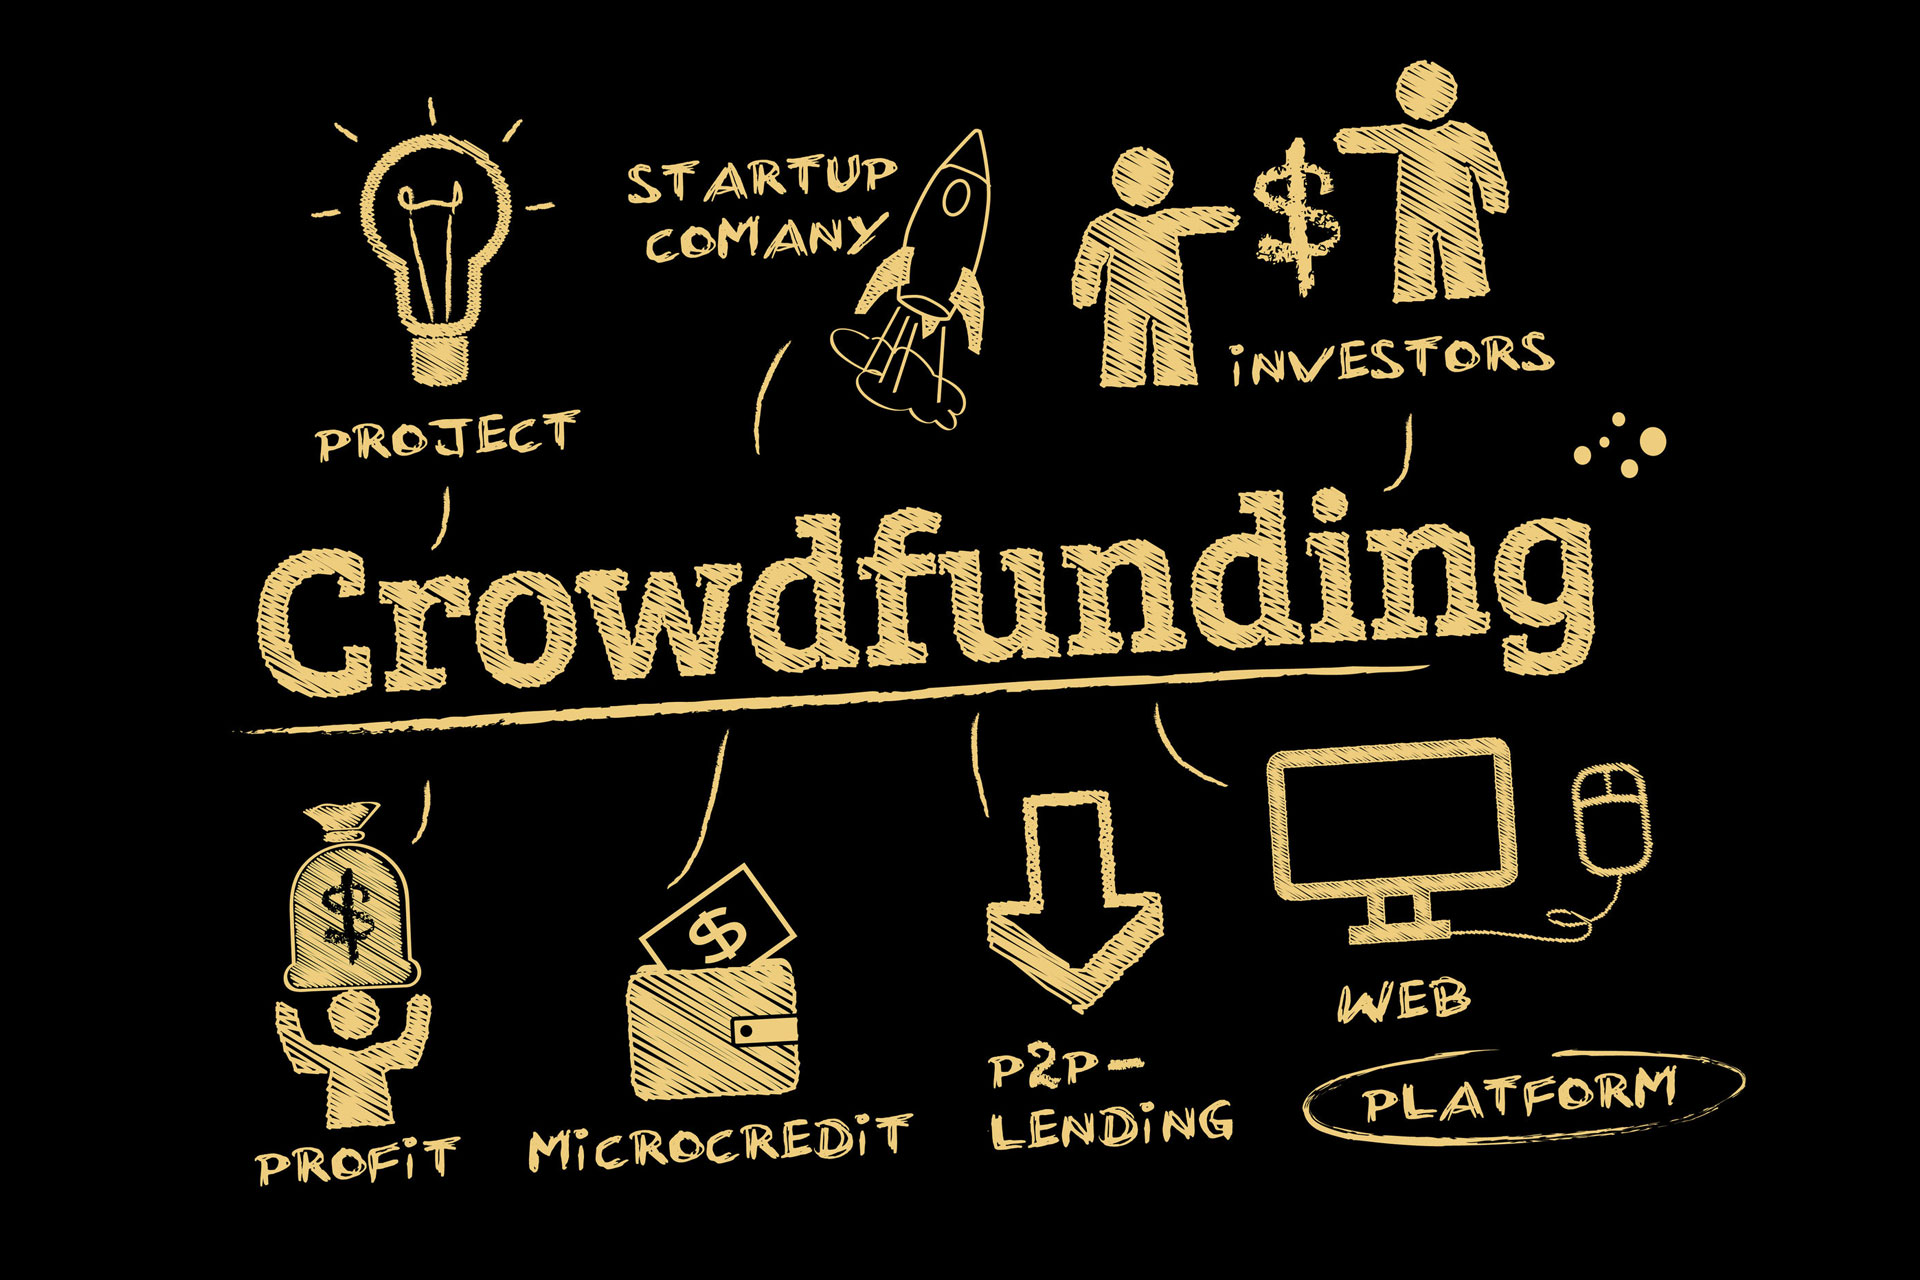 5-things-to-consider-before-launching-a-crowdfunding-campaign-huffpost